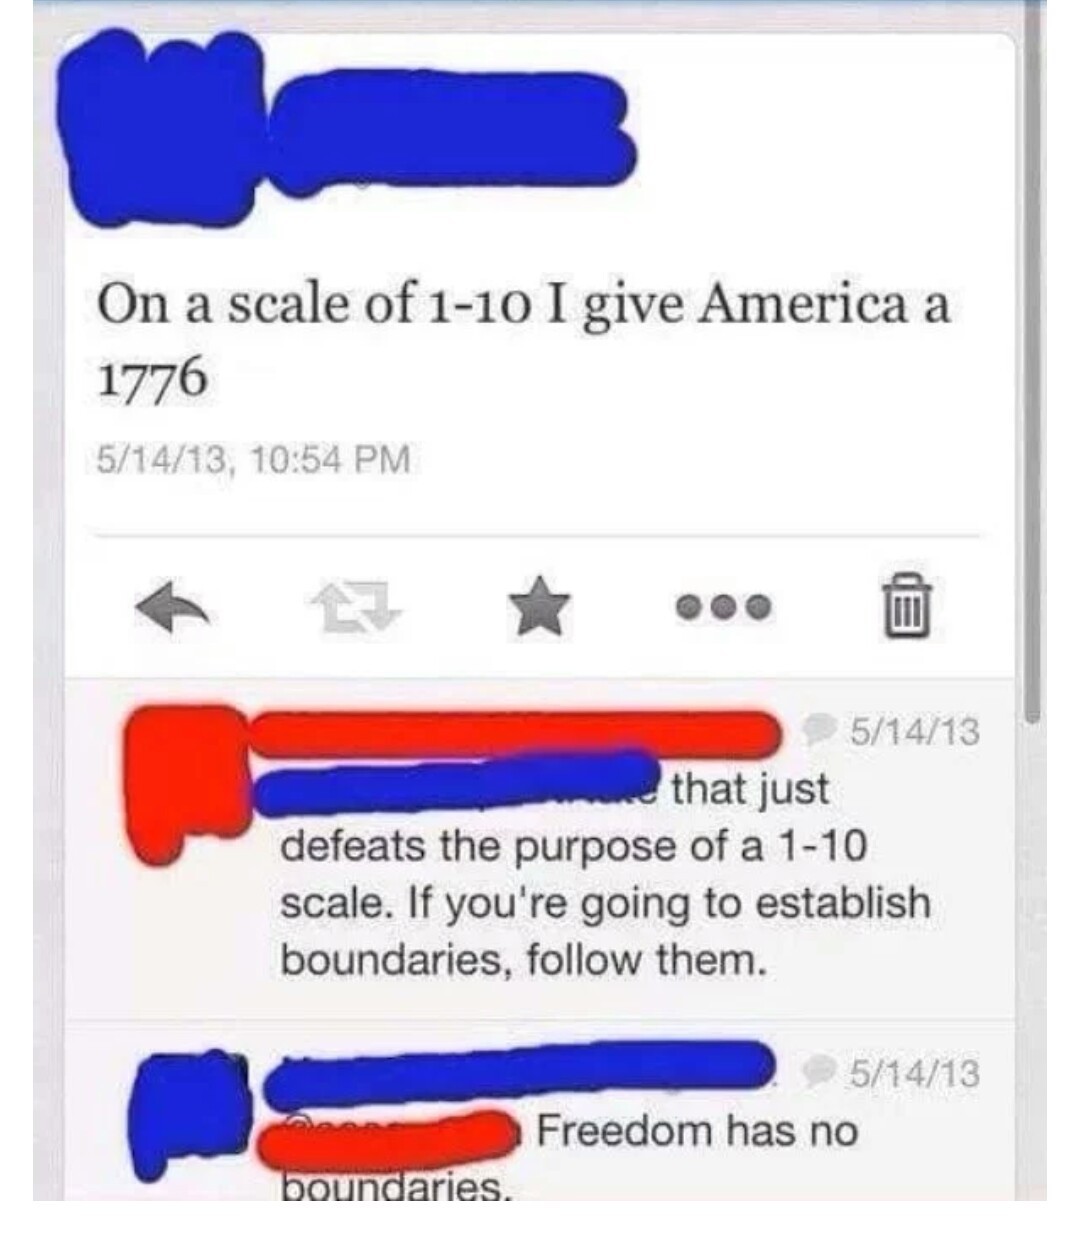 scale of one to america - On a scale of 110 I give America a 1776 51413, 51413 that just defeats the purpose of a 110 scale. If you're going to establish boundaries, them. 51413 Freedom has no boundaries.